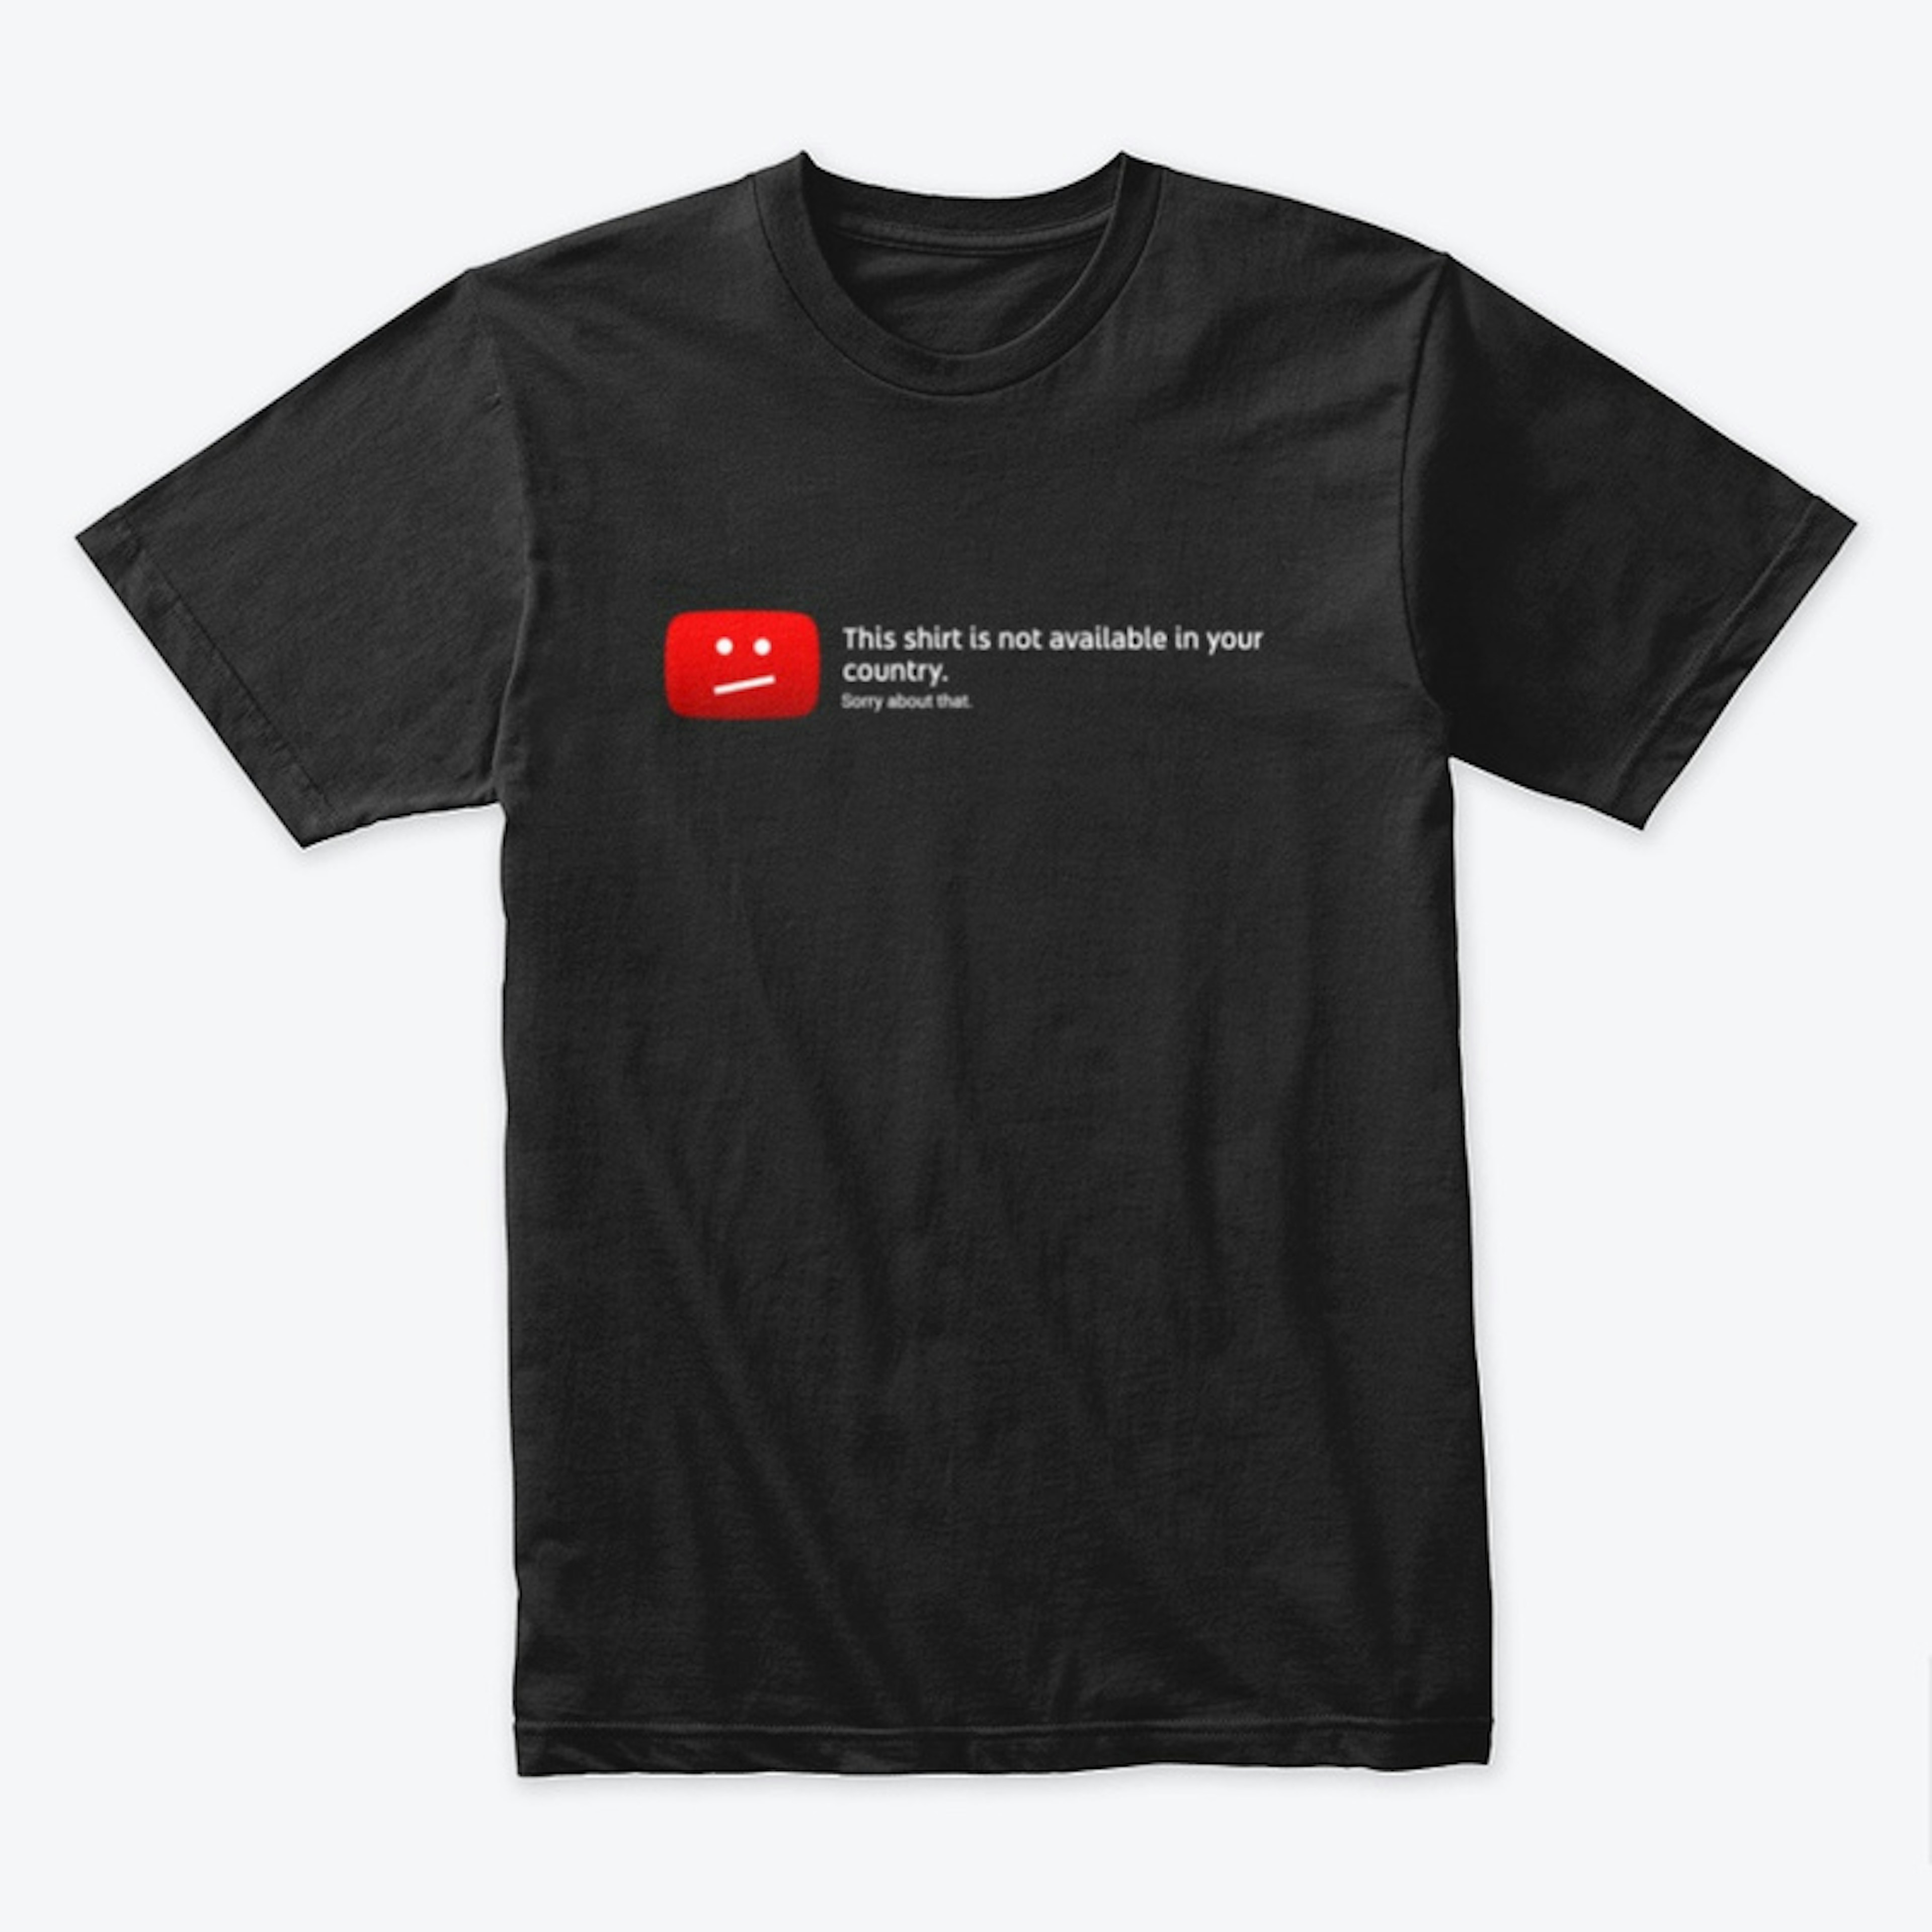 Shirt not available in your country.